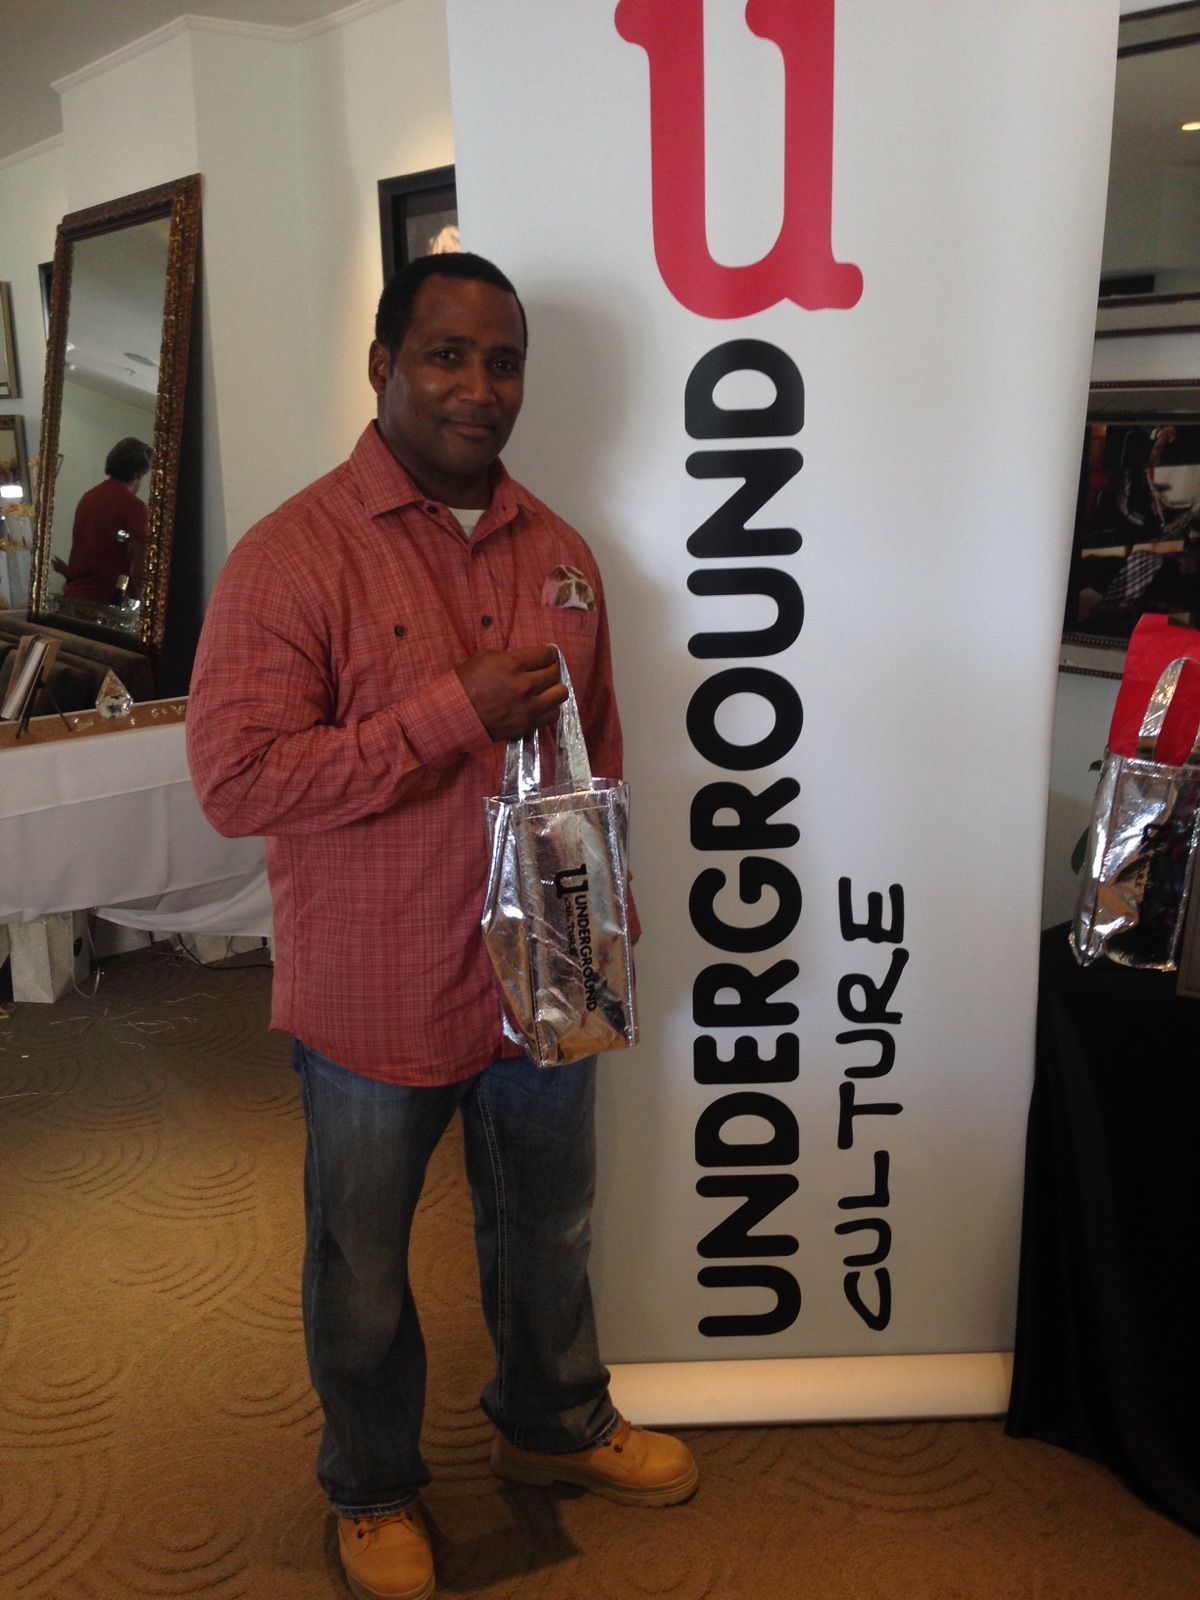 Darius Cottrell at DPA Pre-Emmy Awards Gifting Suite at The Luxe in Beverly Hills